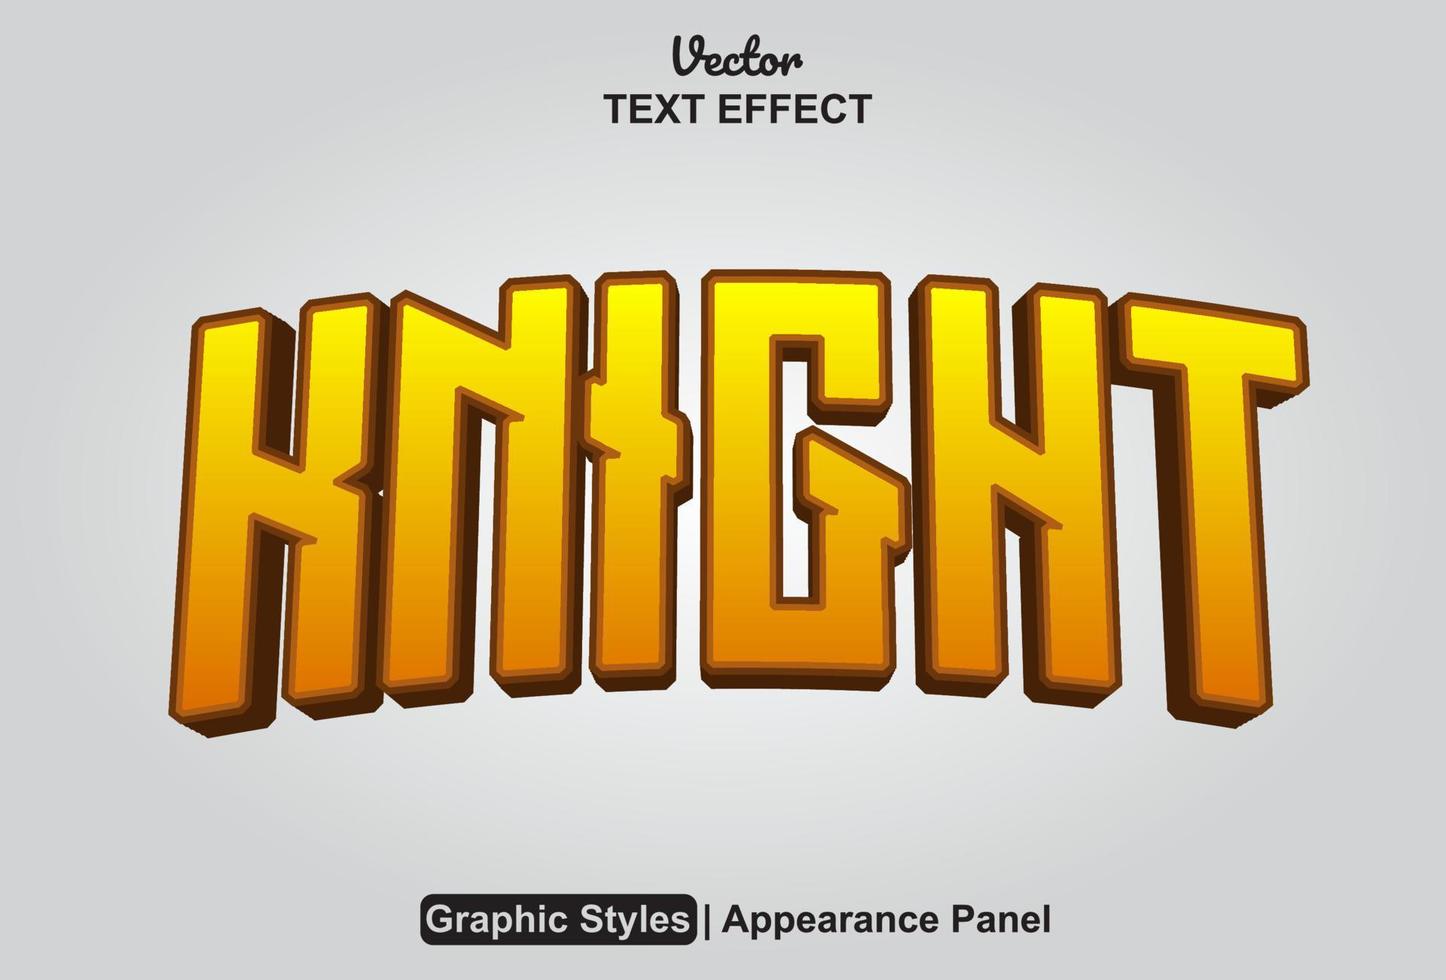 knight text effect with graphic style and editable. vector